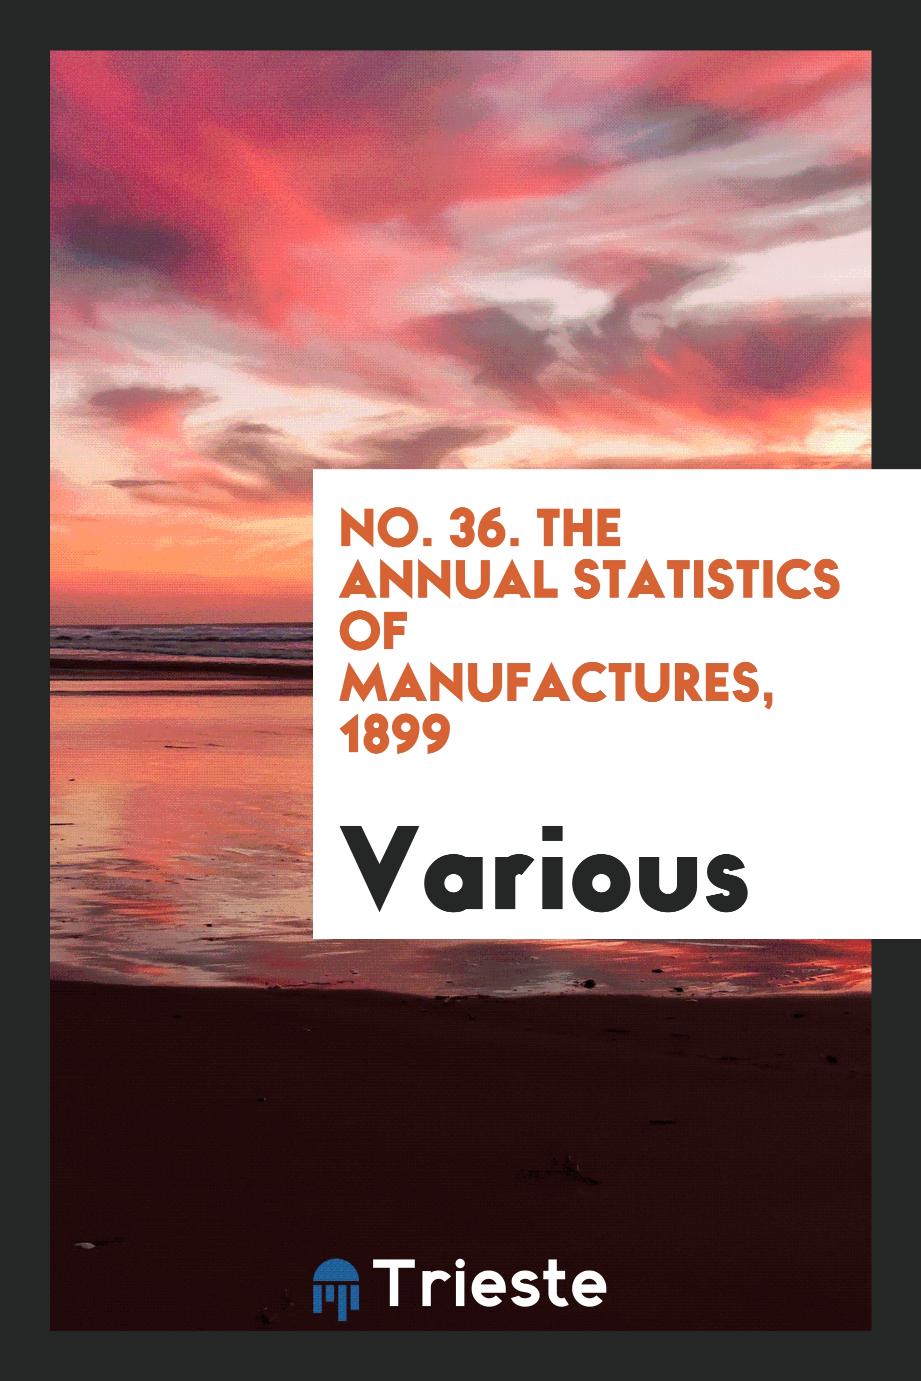 No. 36. The Annual Statistics of Manufactures, 1899